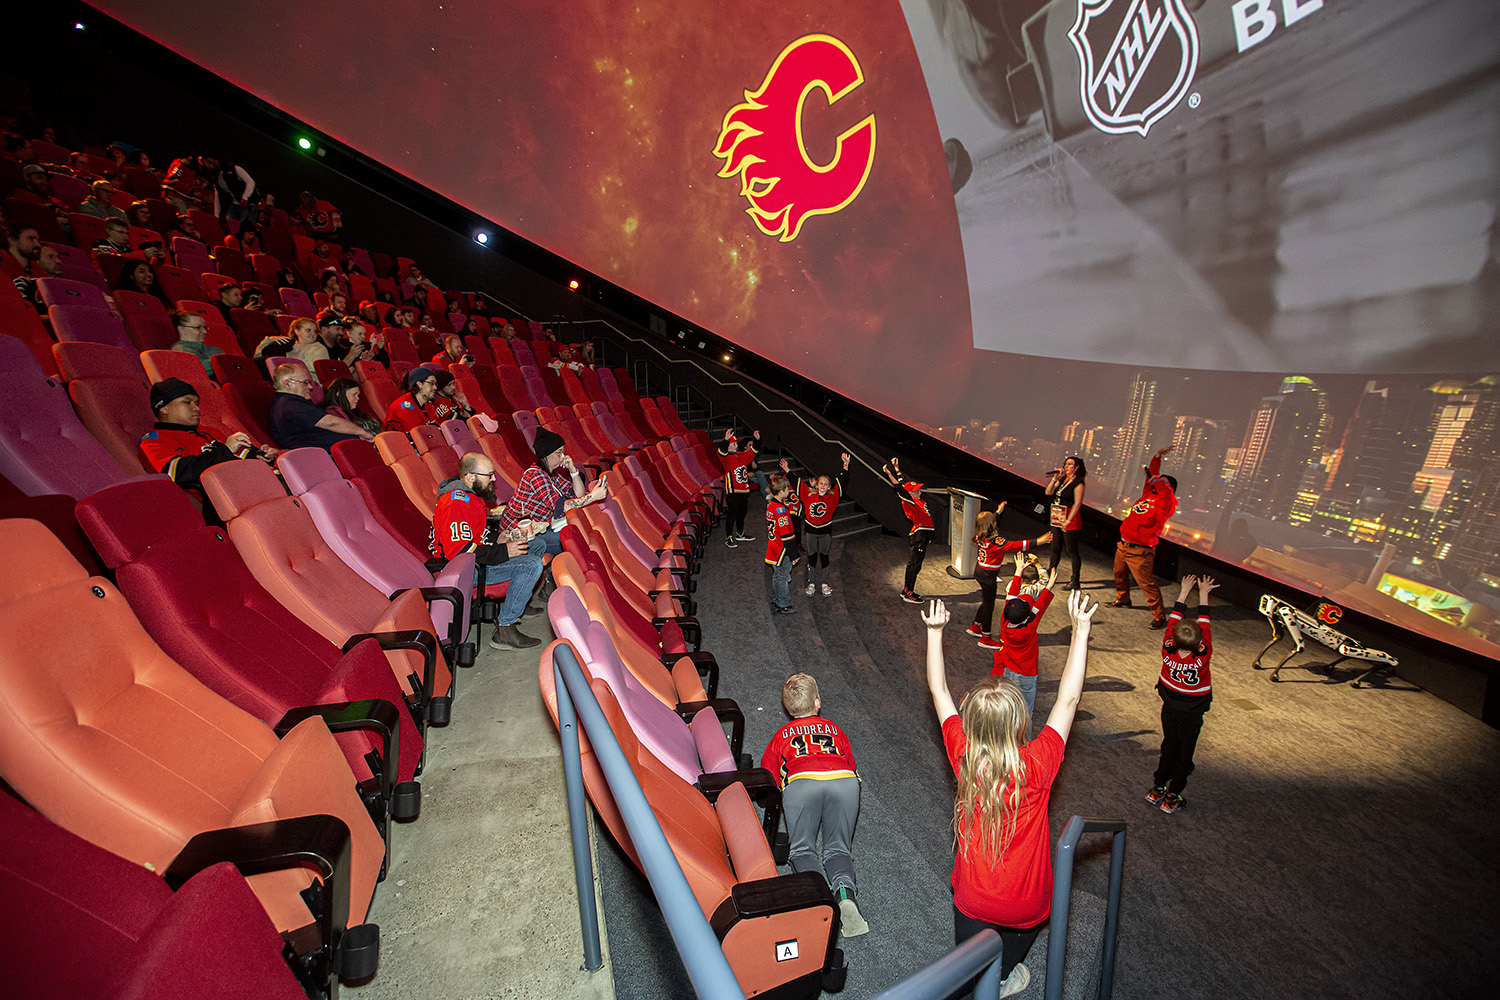 The Infinity Dome 360° theatre - Calgary Attractions